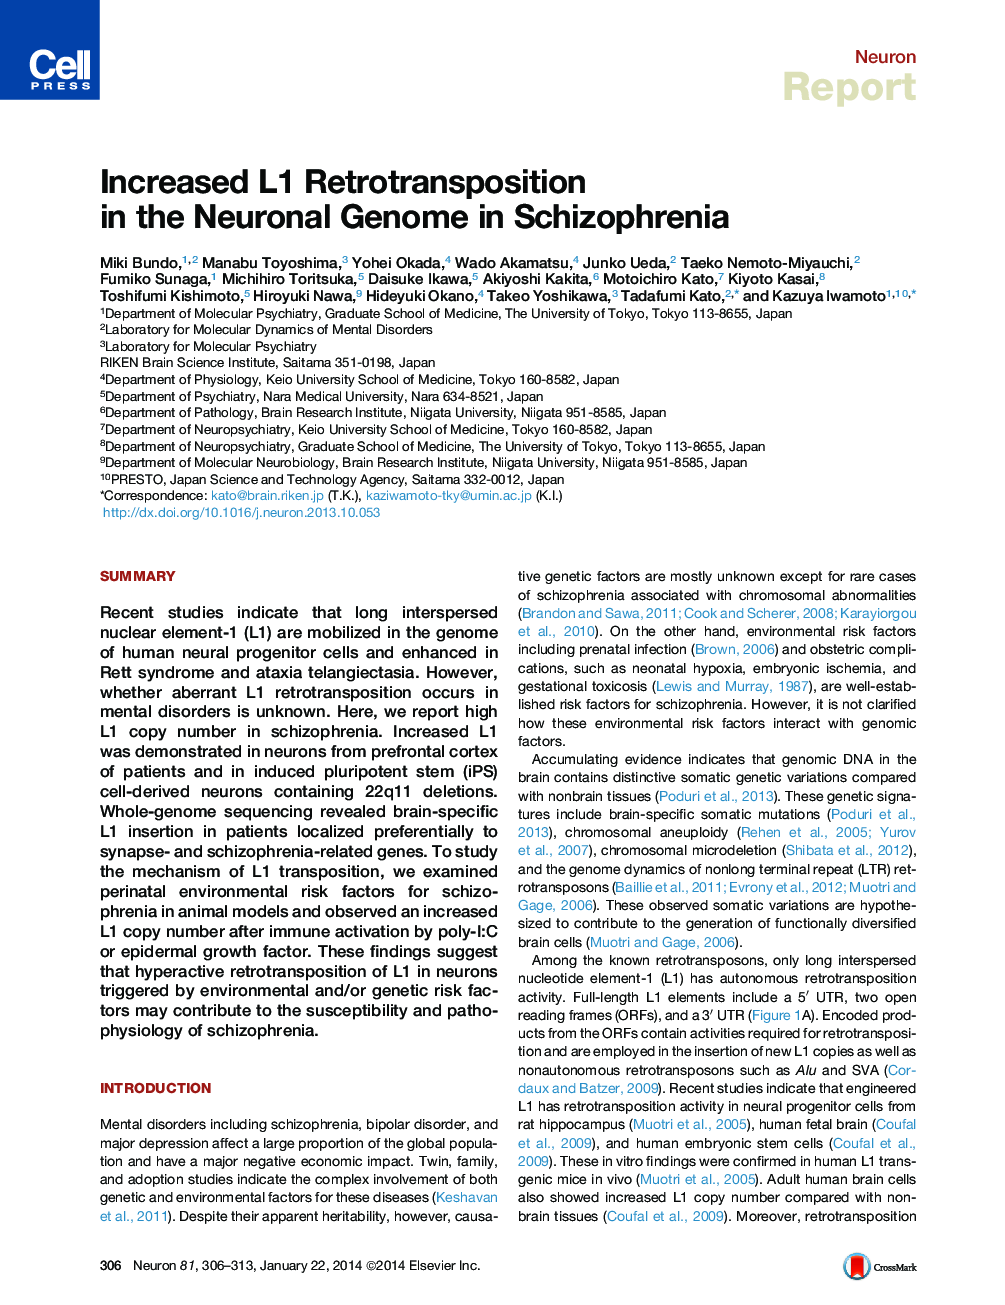 Increased L1 Retrotransposition in the Neuronal Genome in Schizophrenia